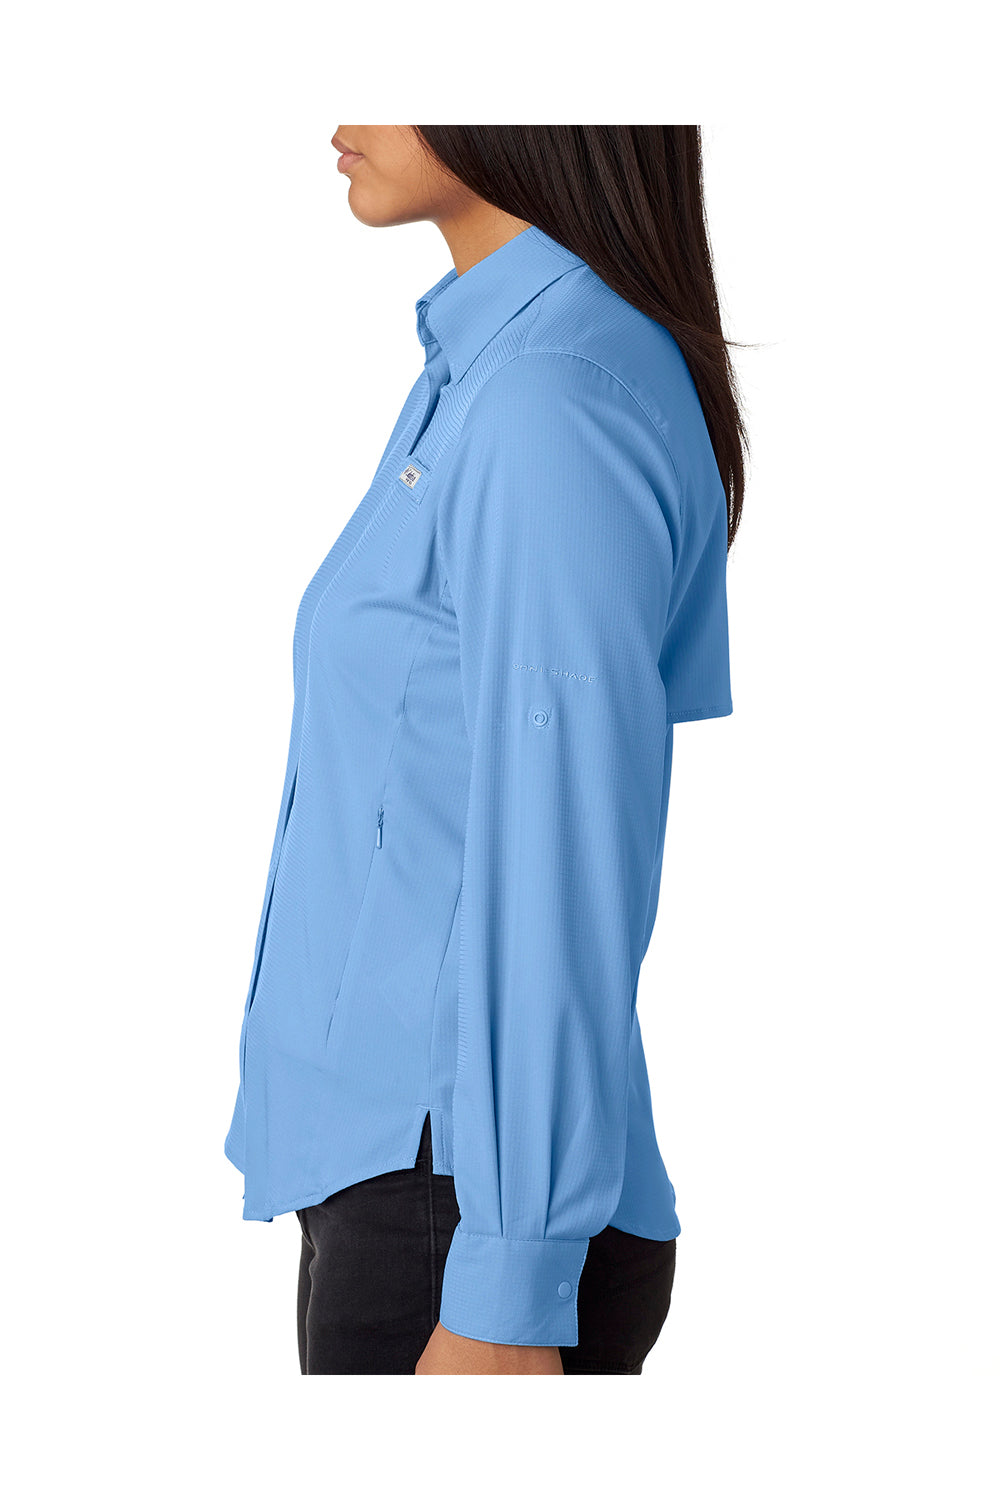 Columbia 7278 Womens Tamiami II Moisture Wicking Long Sleeve Button Down Shirt w/ Double Pockets White Cap Blue Side